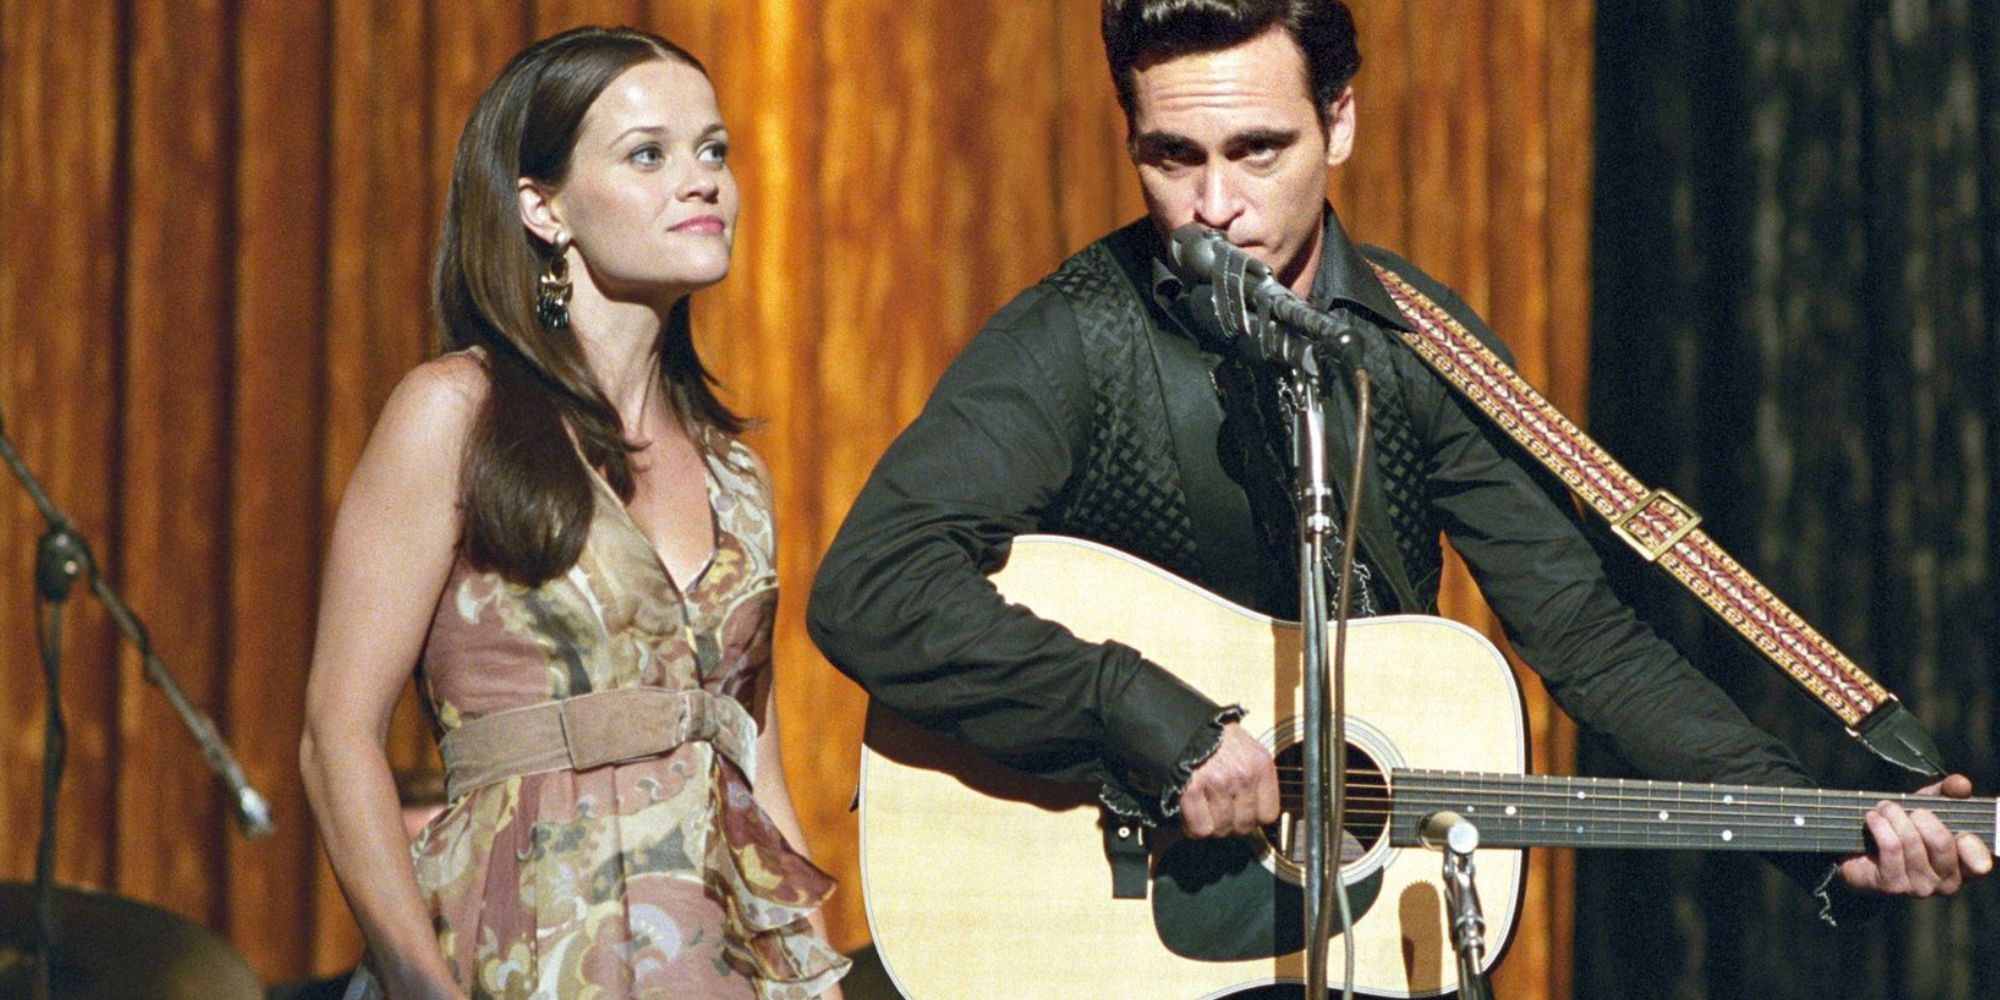 Reese Witherspoon standing next to Joaquin Phoenix on stage singing together in Walk the Line